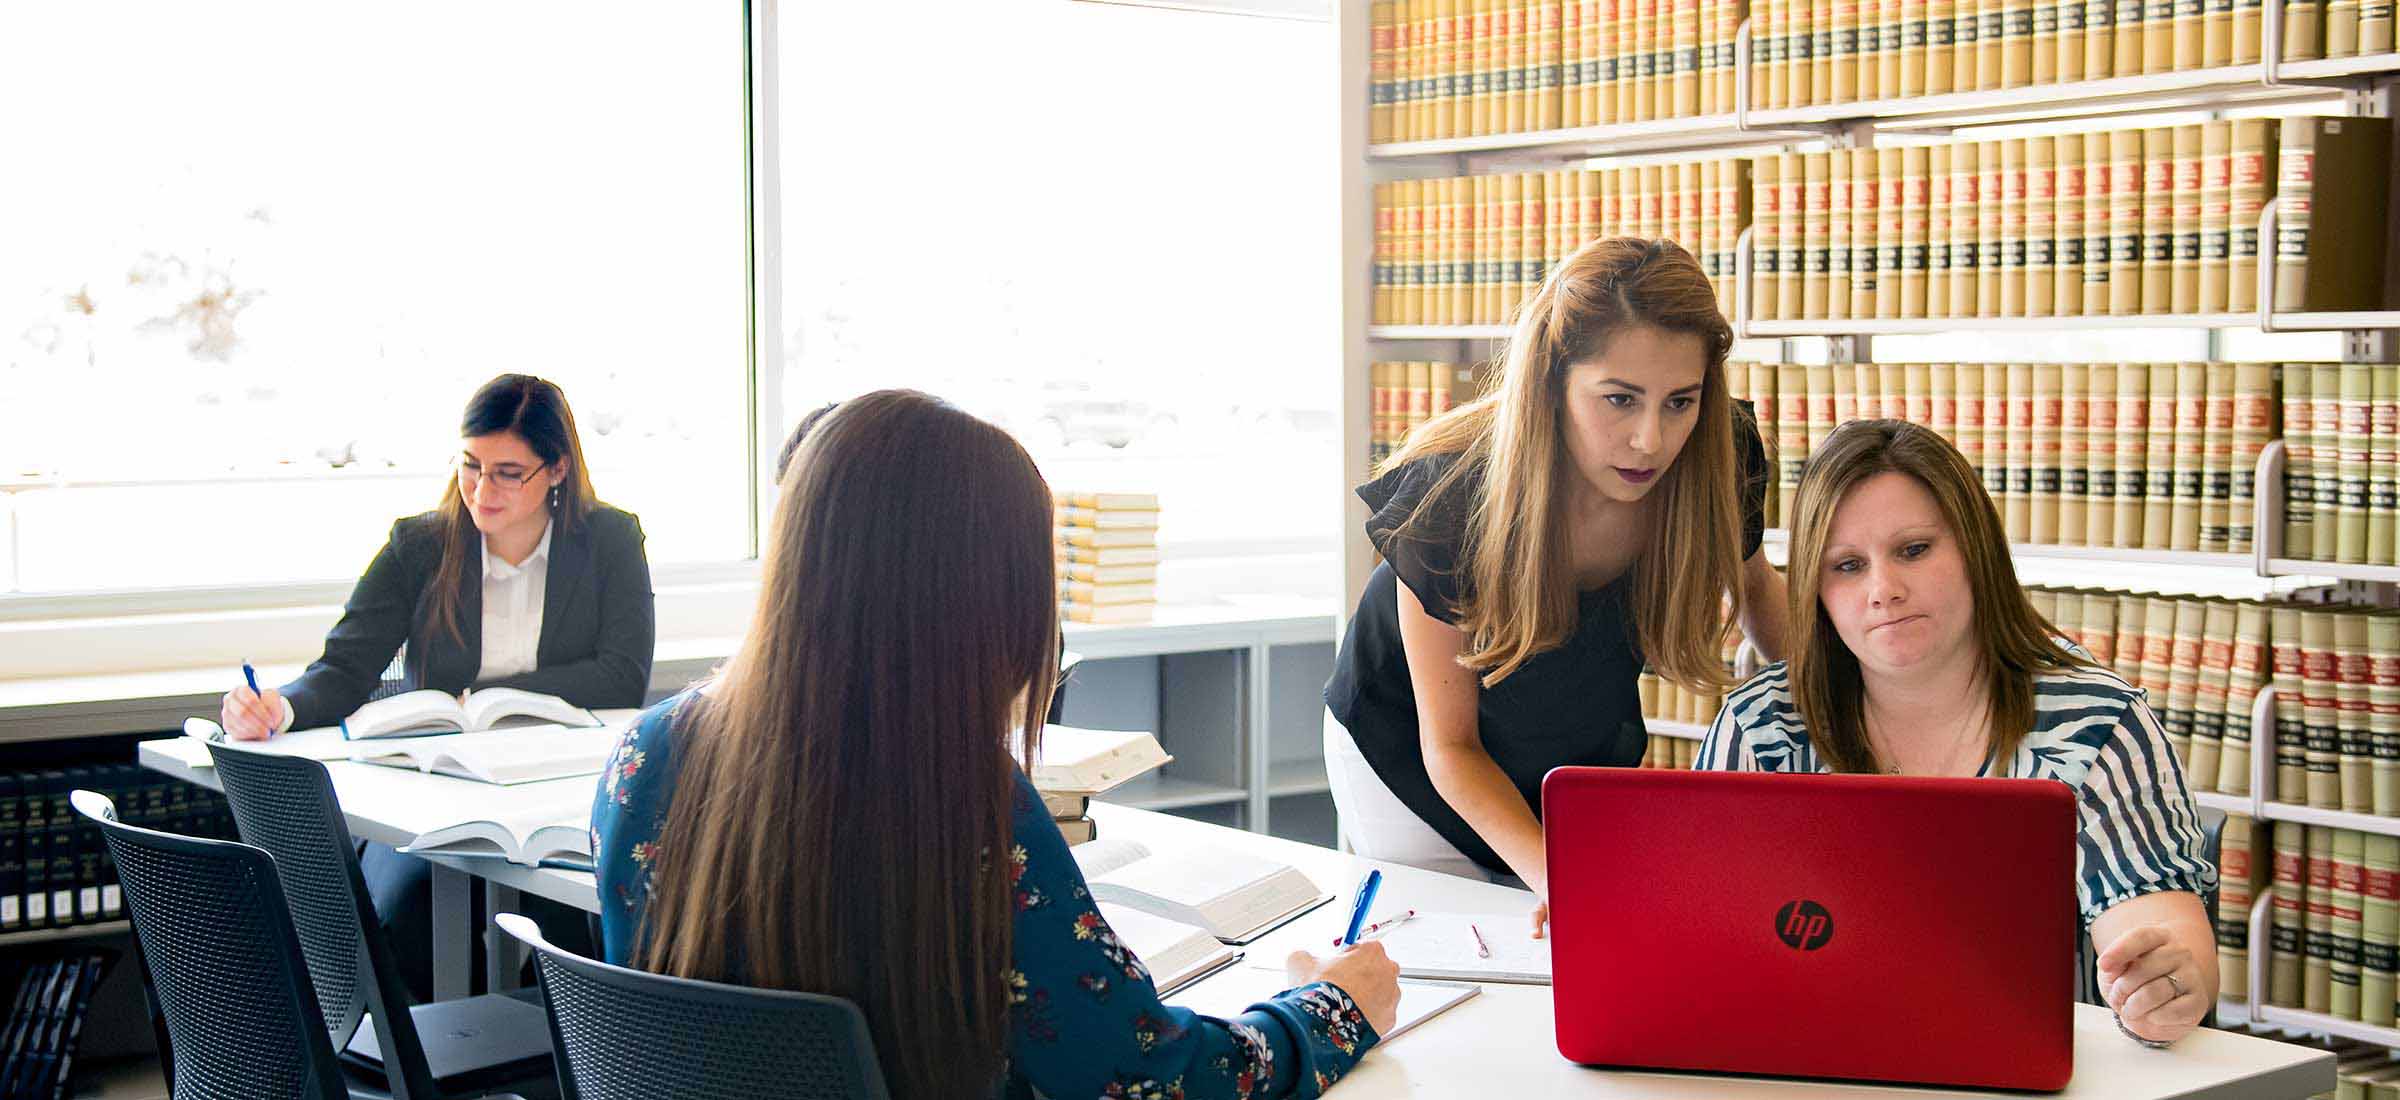 Paralegal students working in a library